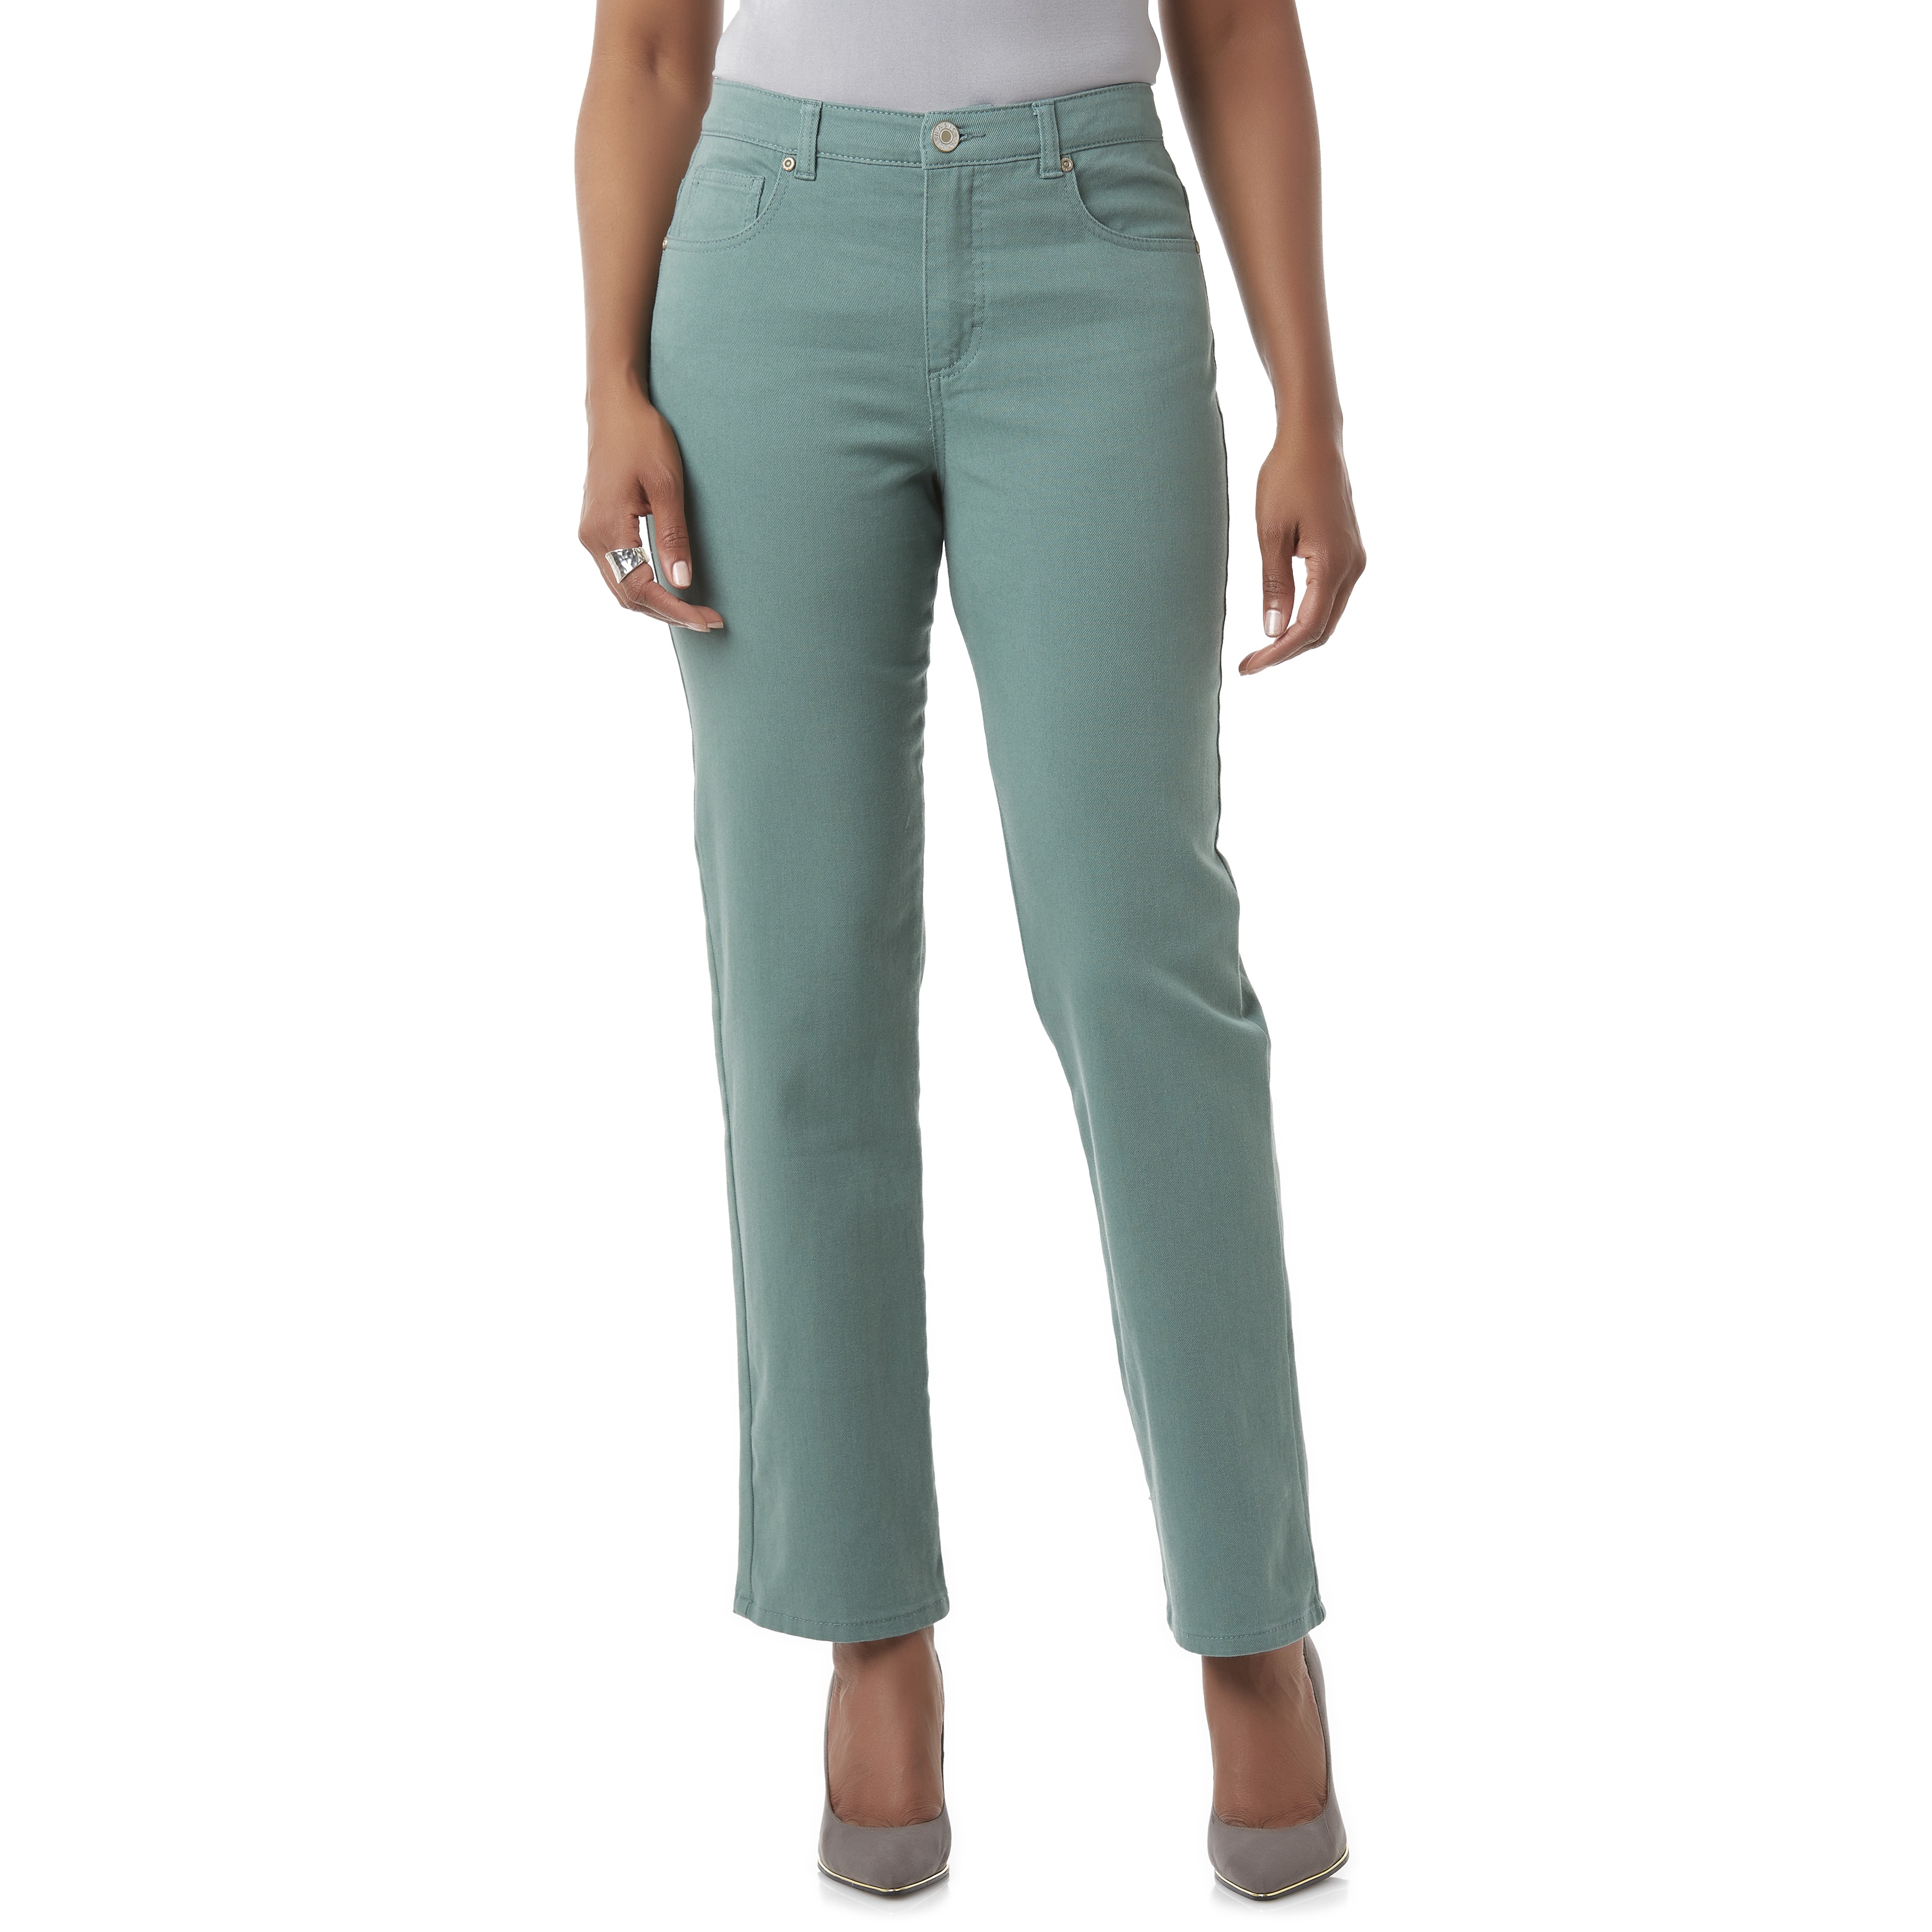 Basic Editions Women's Colored Jeans